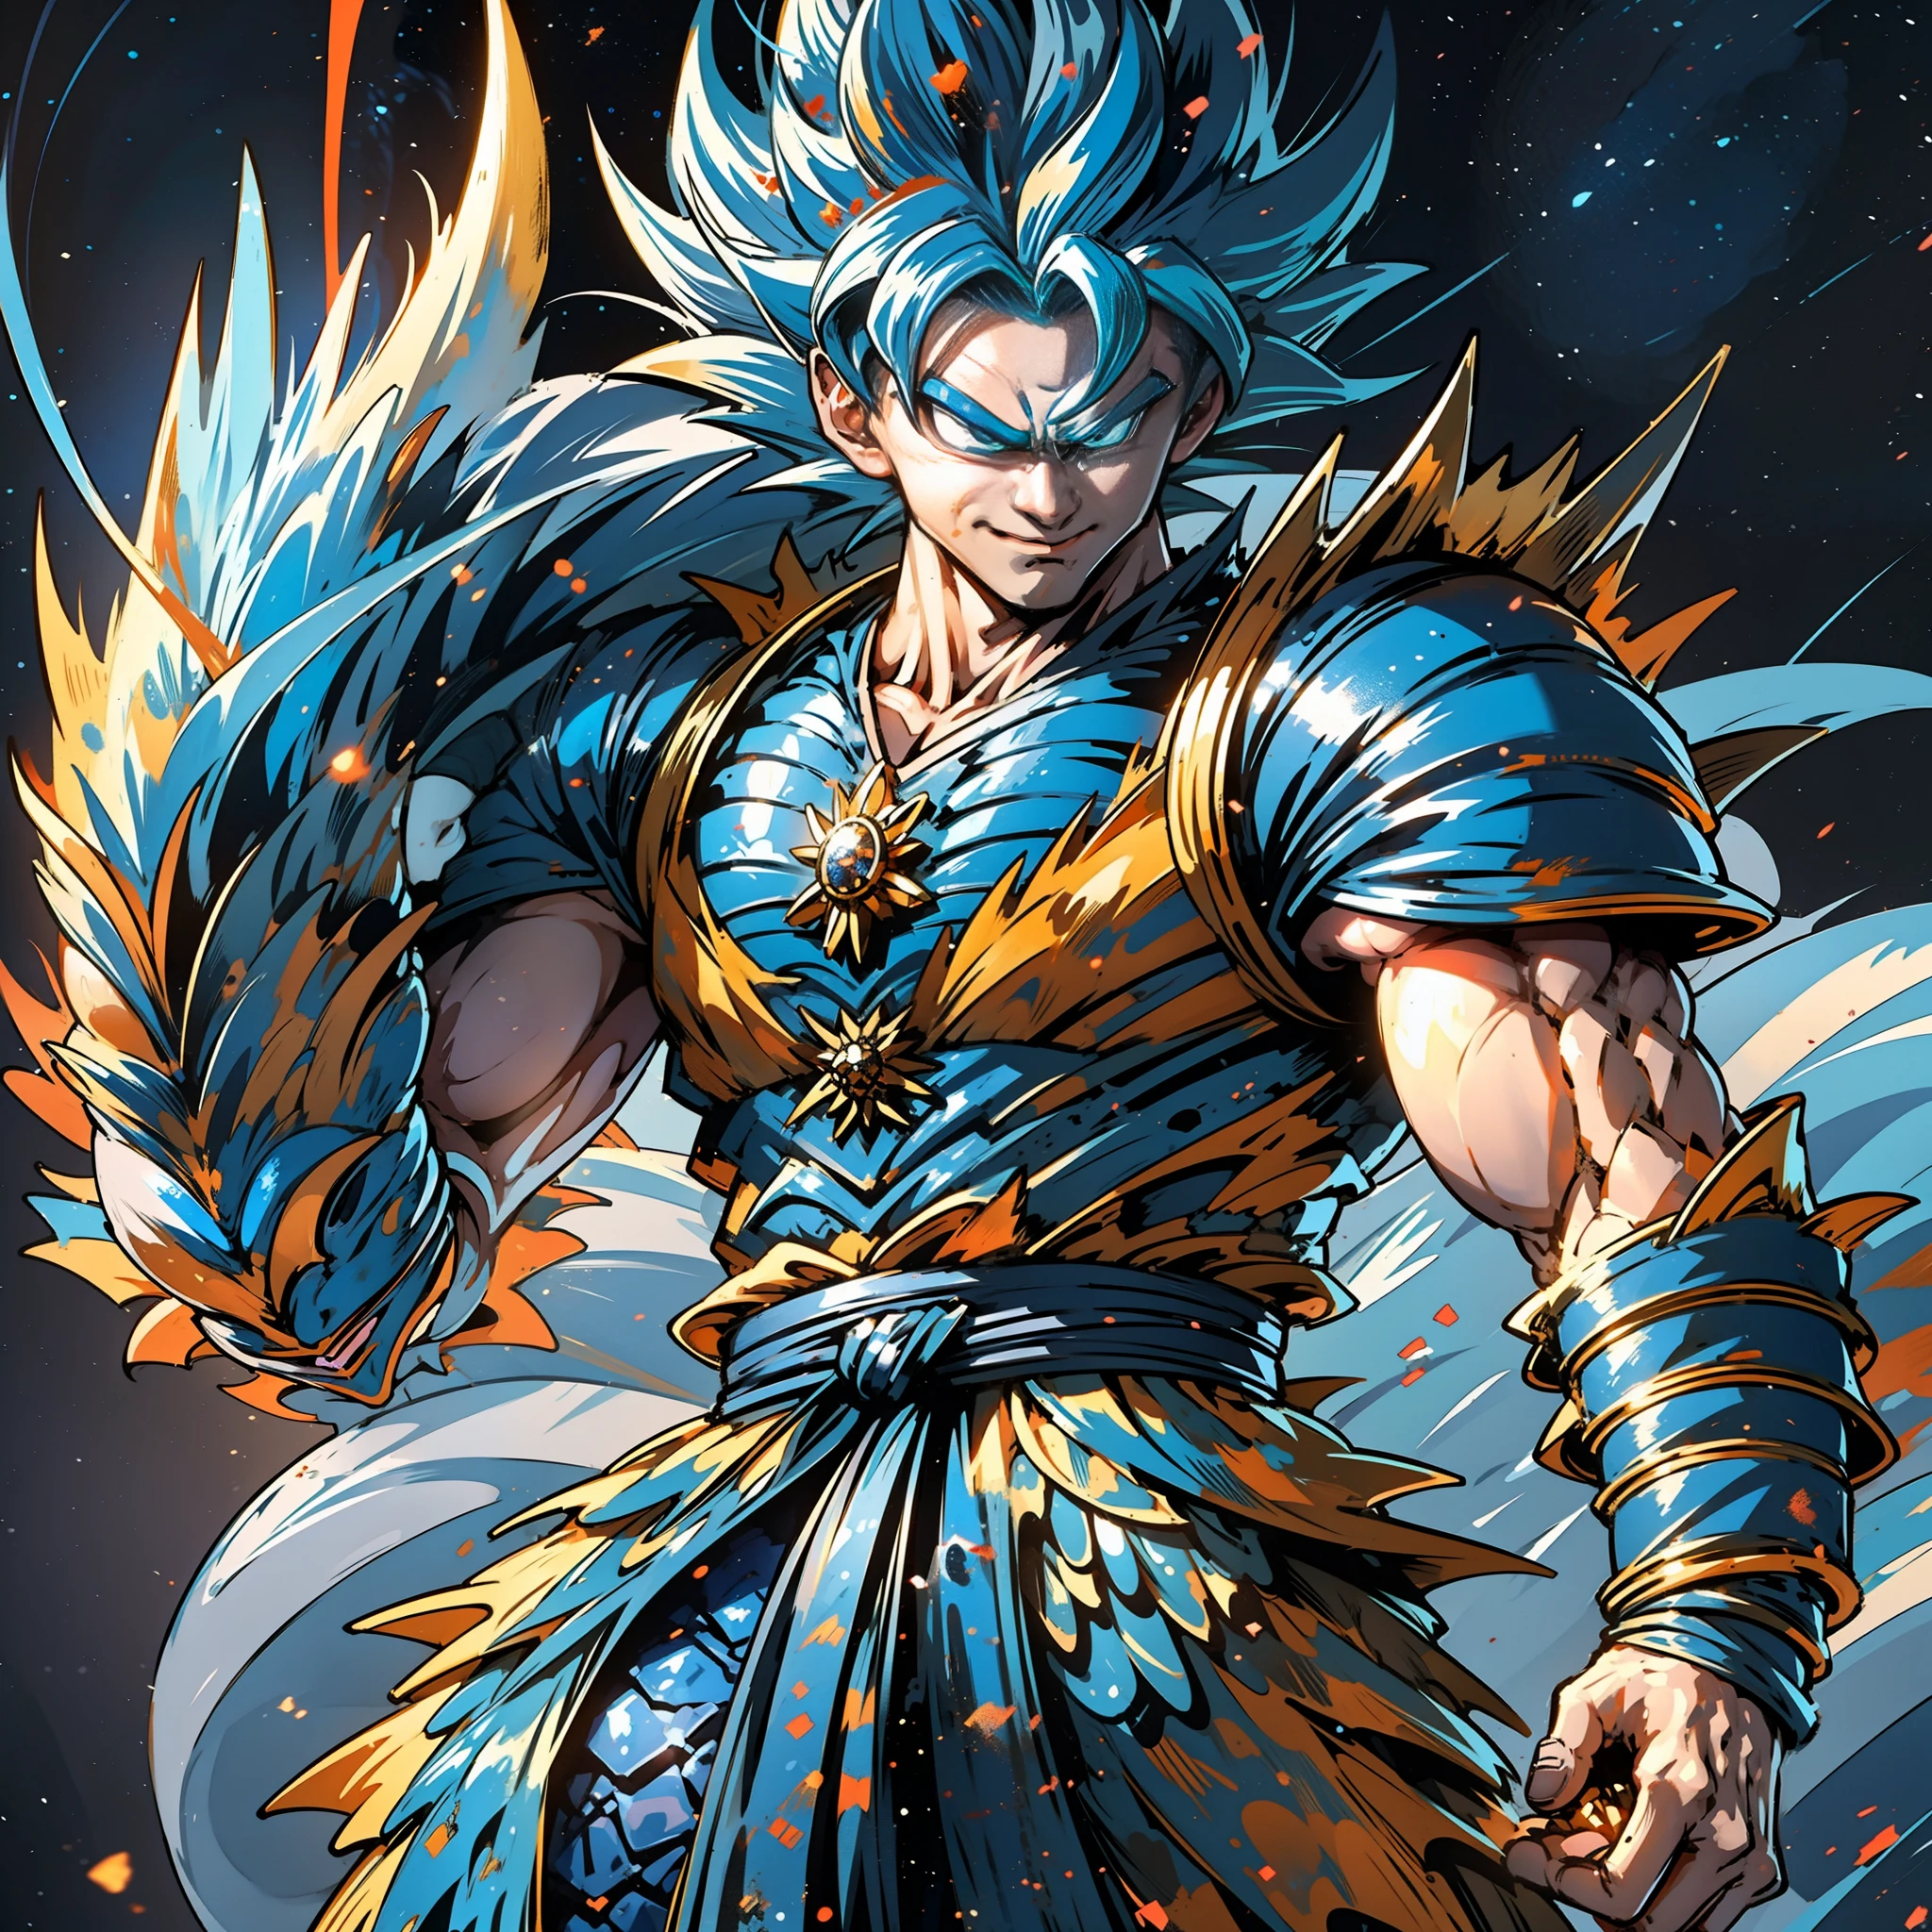 In Dragon Ball, Son Goku puts on armor made of dragon scales and bursts out with blue particle light